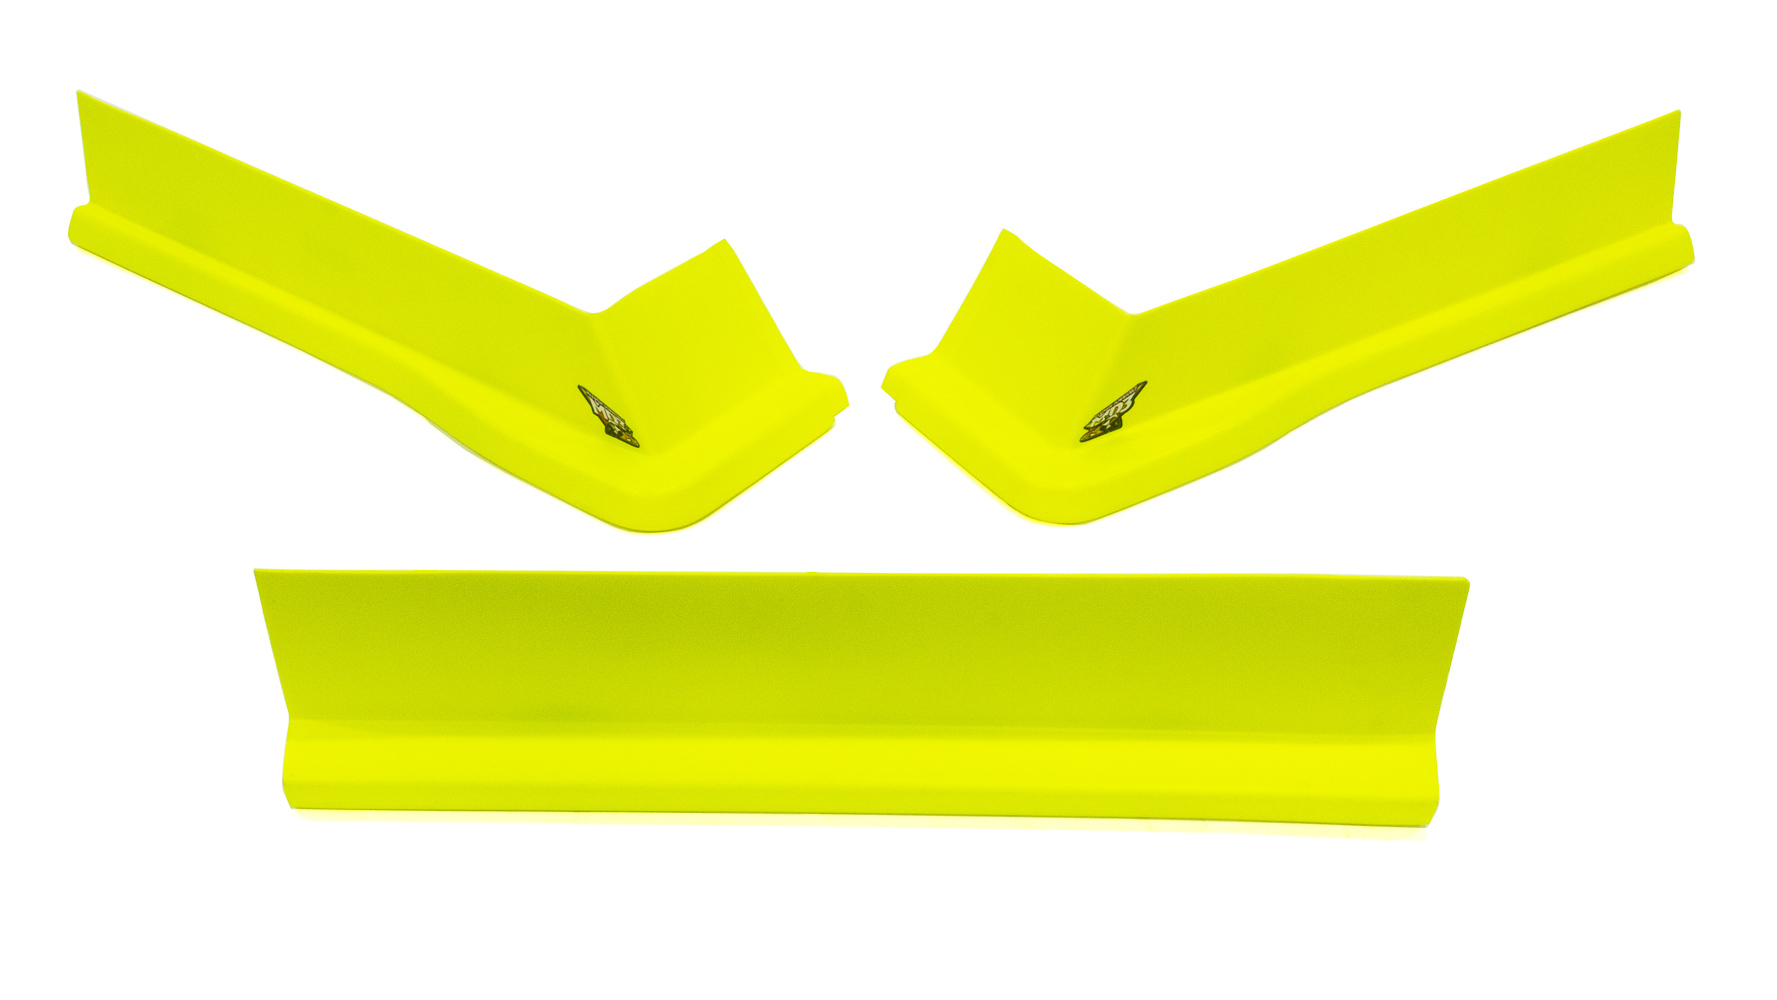 Air Valance - MD3 - 3 Piece - Molded Plastic - Fluorescent Yellow - Modified - Kit